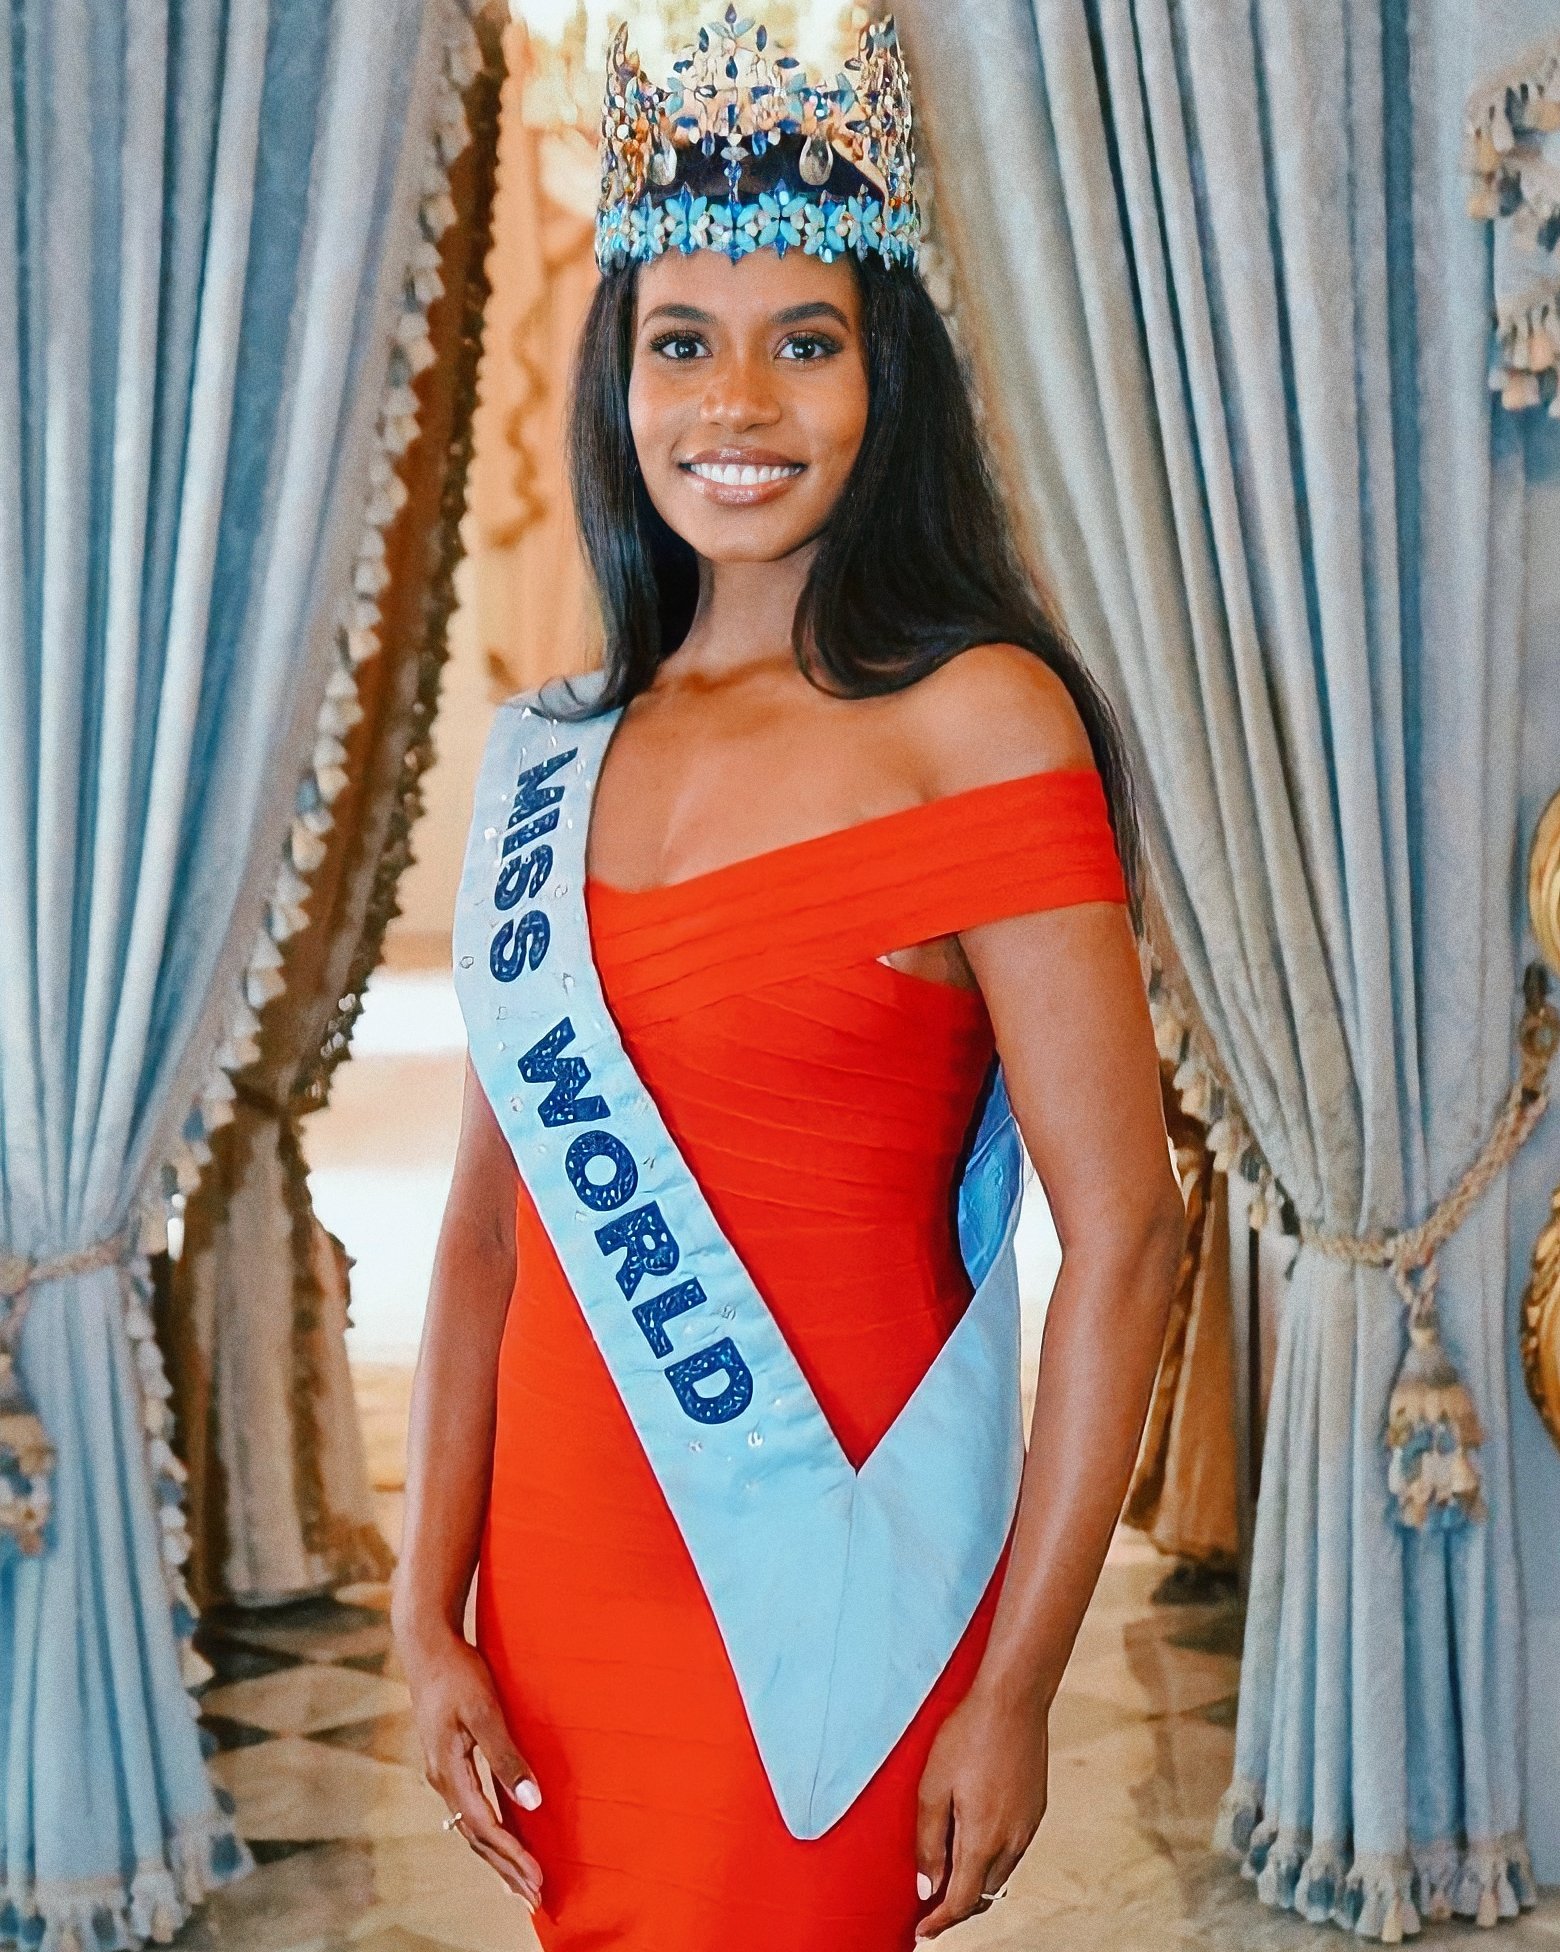 Official Thread of Miss World 2019 ® Toni-Ann Singh - JAMAICA - Page 4 E2m53bYVkAEJvaX?format=jpg&name=large